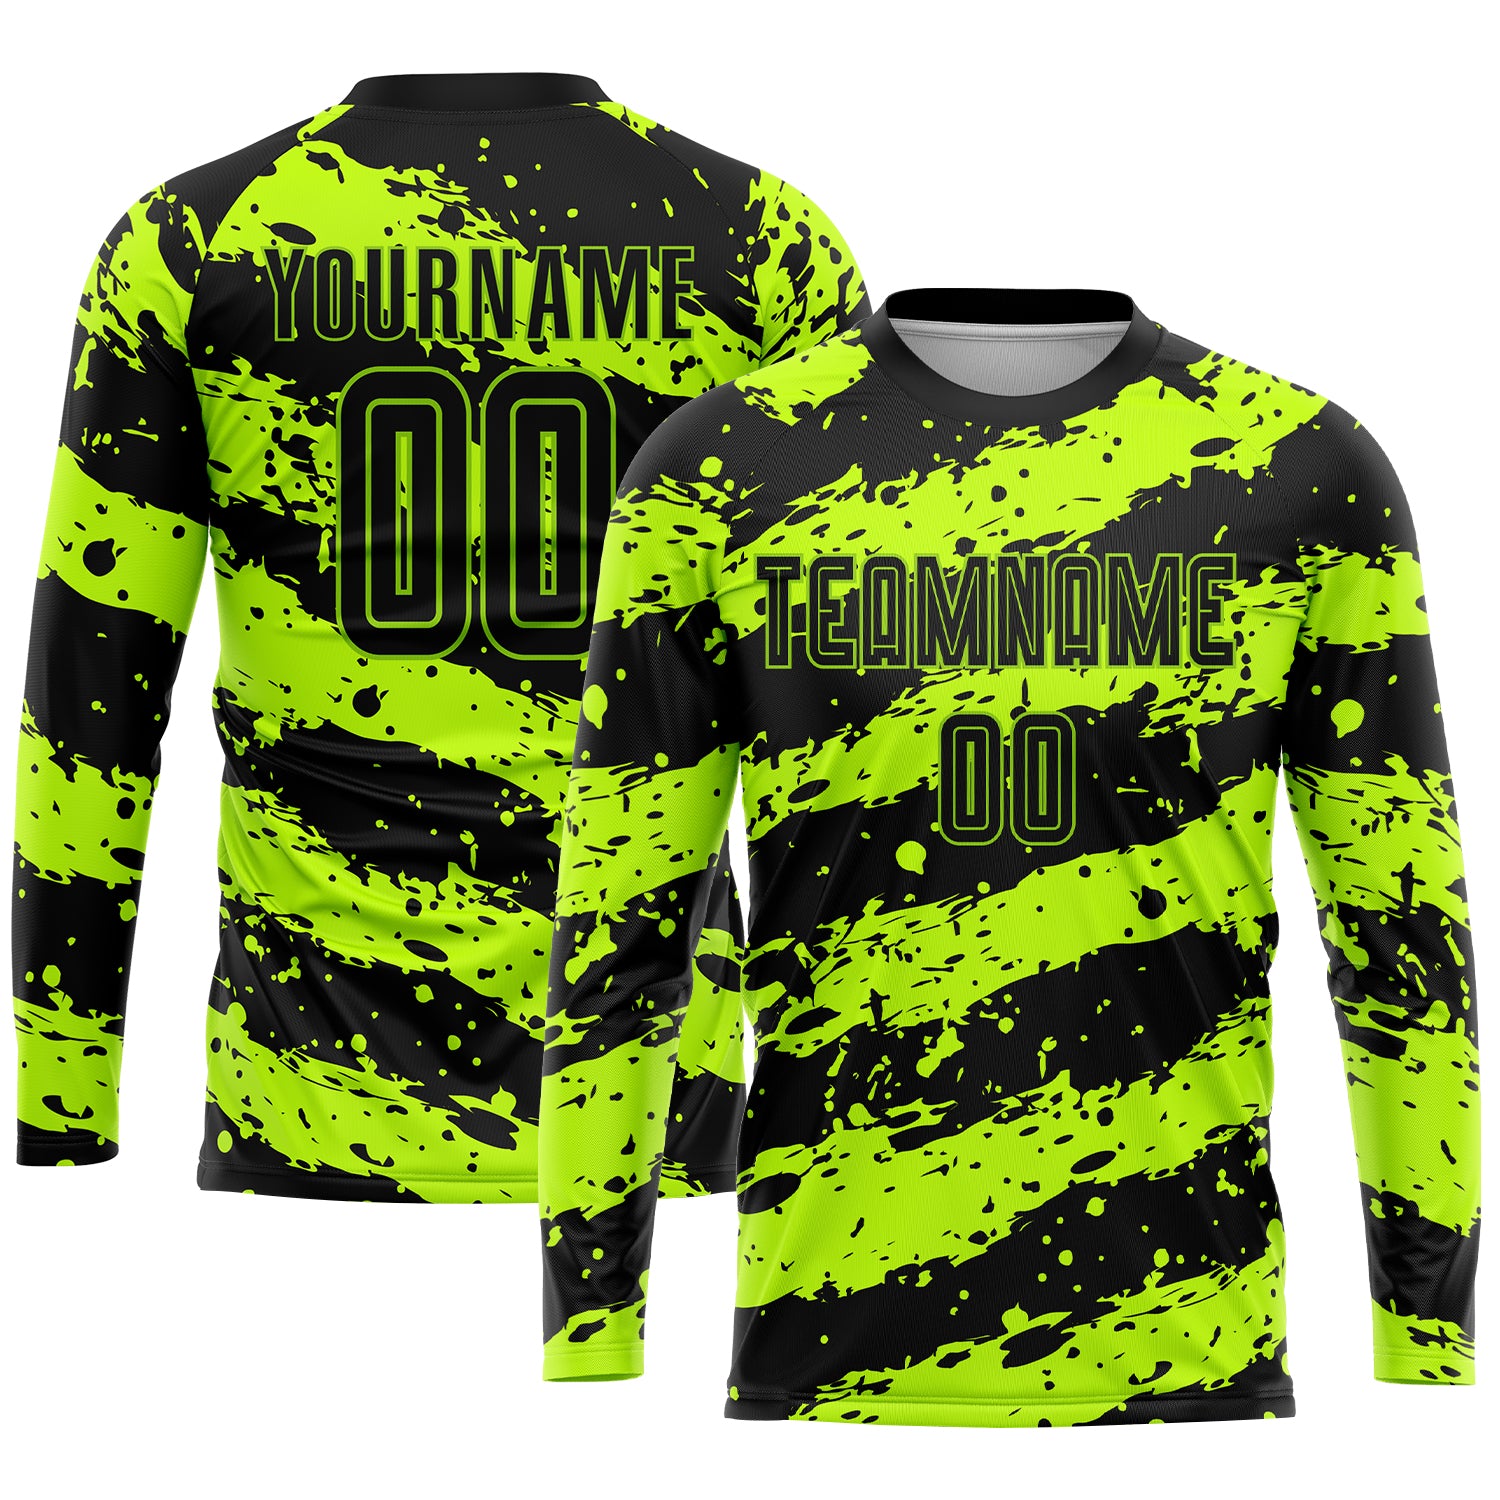 Sublimation Crewneck Sweater Only Neon Green / XL